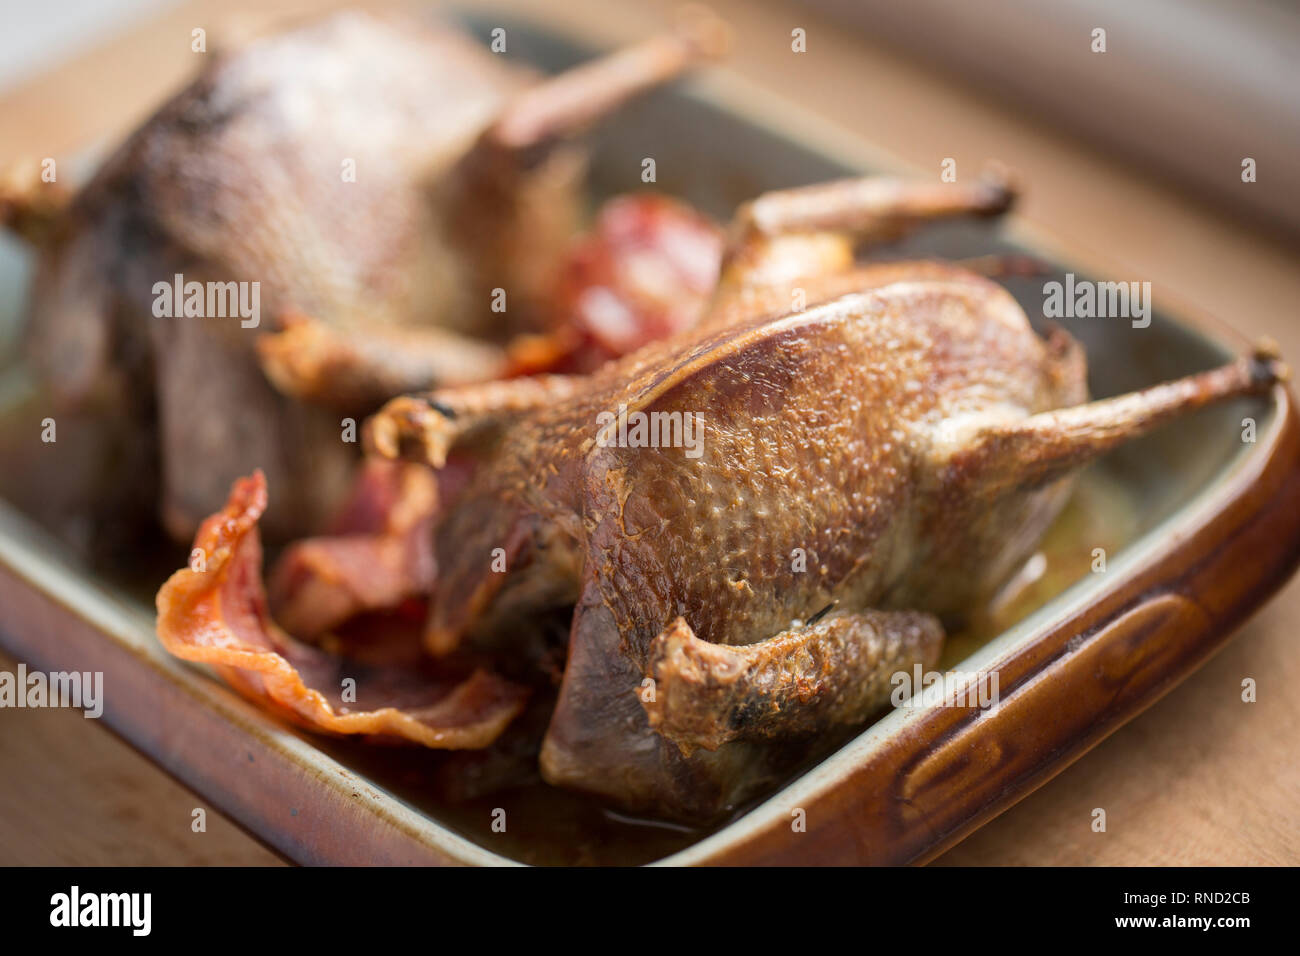 Two woodpigeons that have been roasted with streaky bacon and served in an ovenproof dish with cooking juices. Photographed on a wooden chopping board Stock Photo